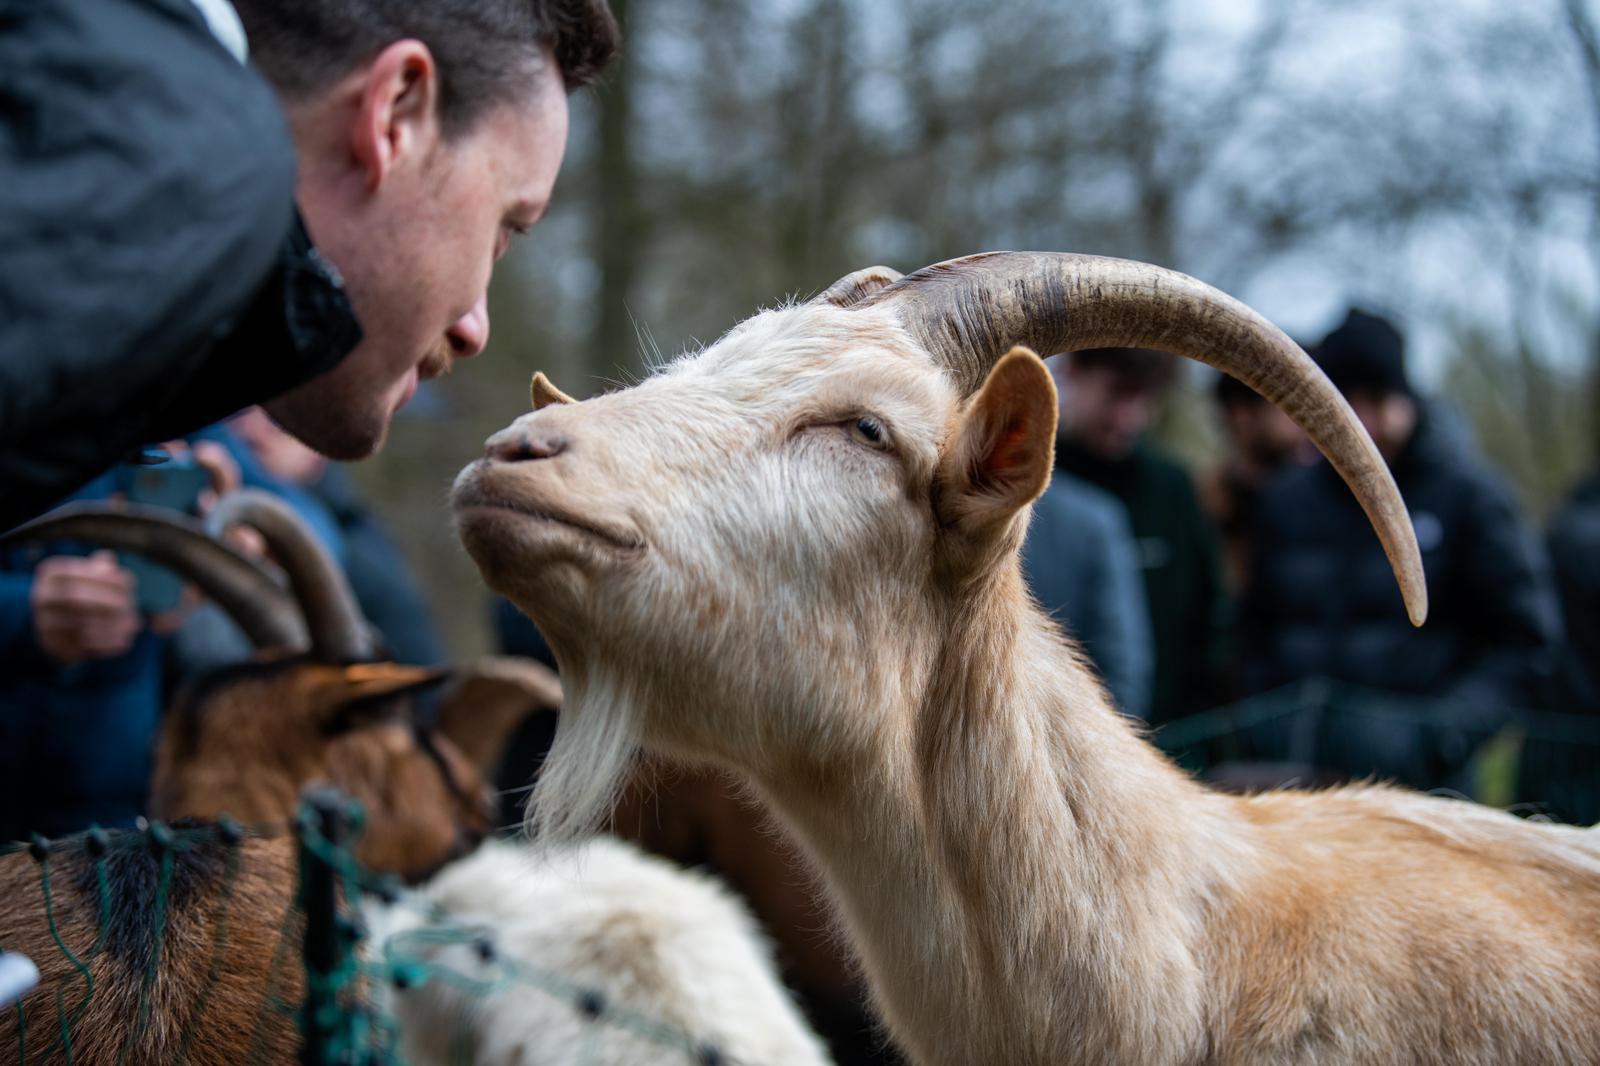 Iain Treloar leans over to go nose to nose with a tall French goat. The goat has long curving horns and a tidy beard and is looking up at Iain with what can only be described as a beatific expression, eyes slightly closed almost as if leaning in for a kiss. Which it might be.